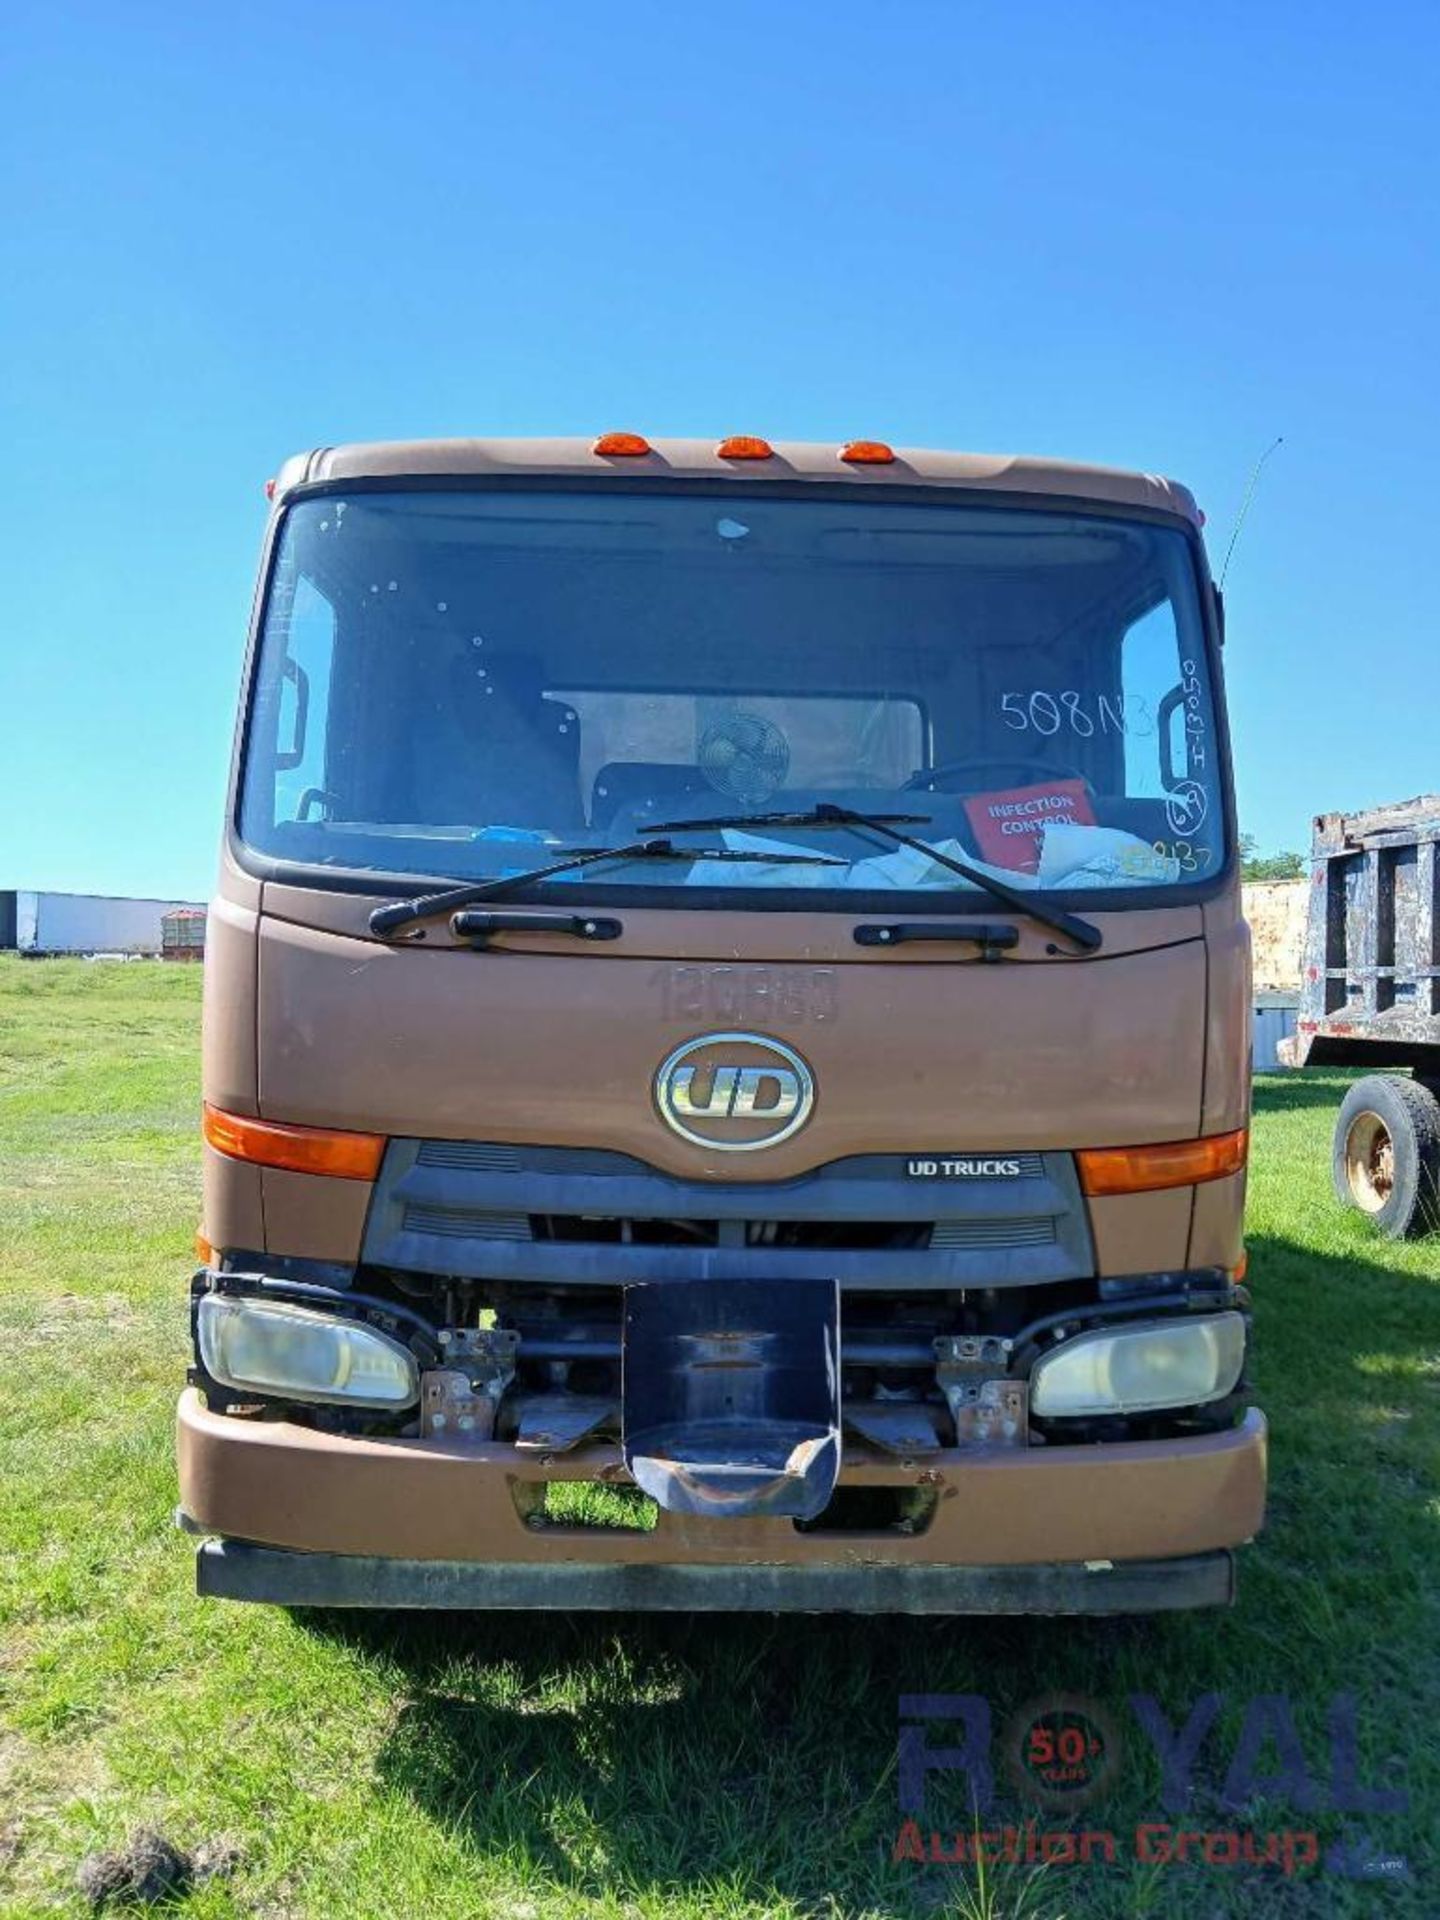 2012 UD3300 Truck Garbage Truck - Image 16 of 16